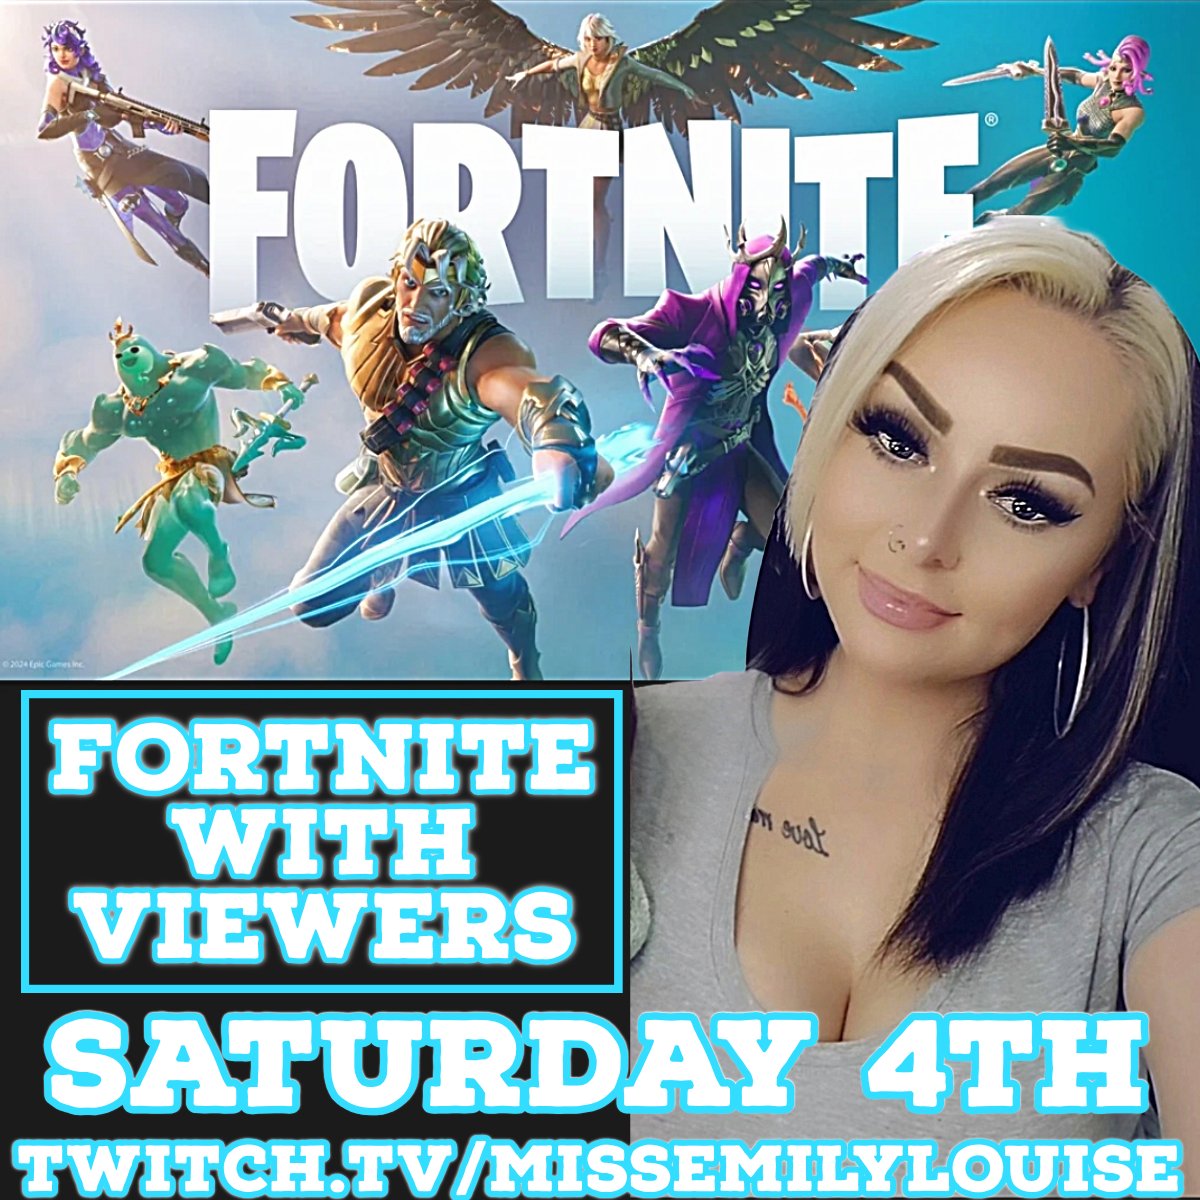 Pew pew 🔫👑 

On Twitch at 8pm 🩵 

Twitch.tv/MissEmilyLouise 

#SaturdayVibes #Maythe4thBeWithYou #Fortnite #chooseyourside #StarWars #twitch